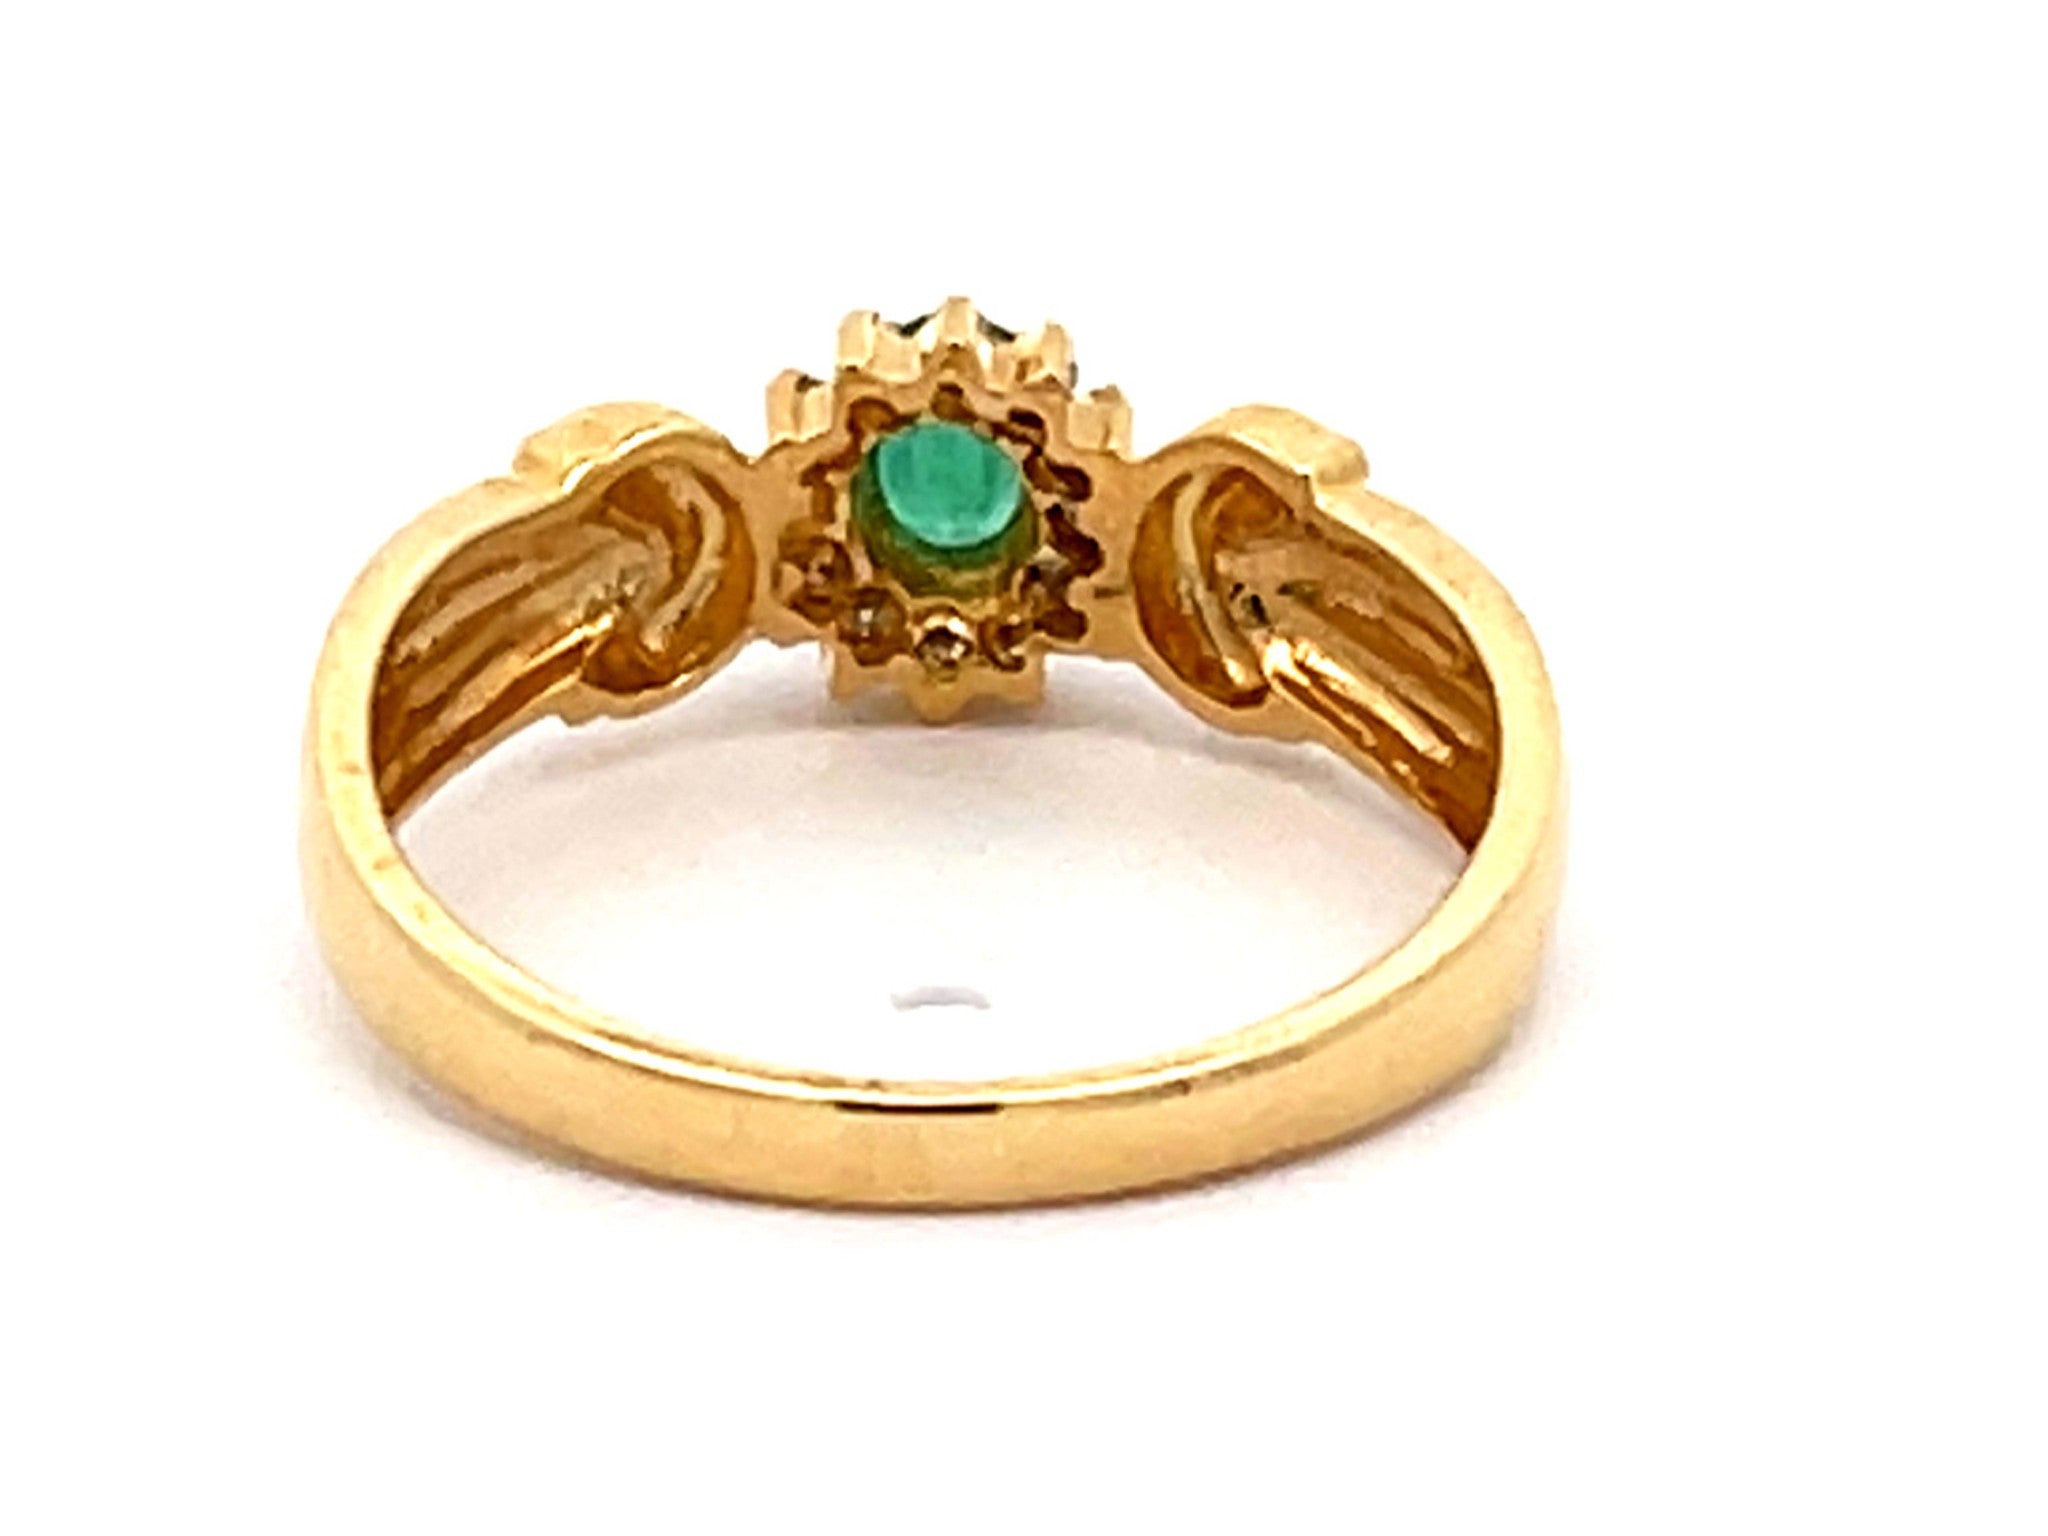 Vintage Green Oval Emerald and Diamond Halo Ring in 14k Yellow Gold